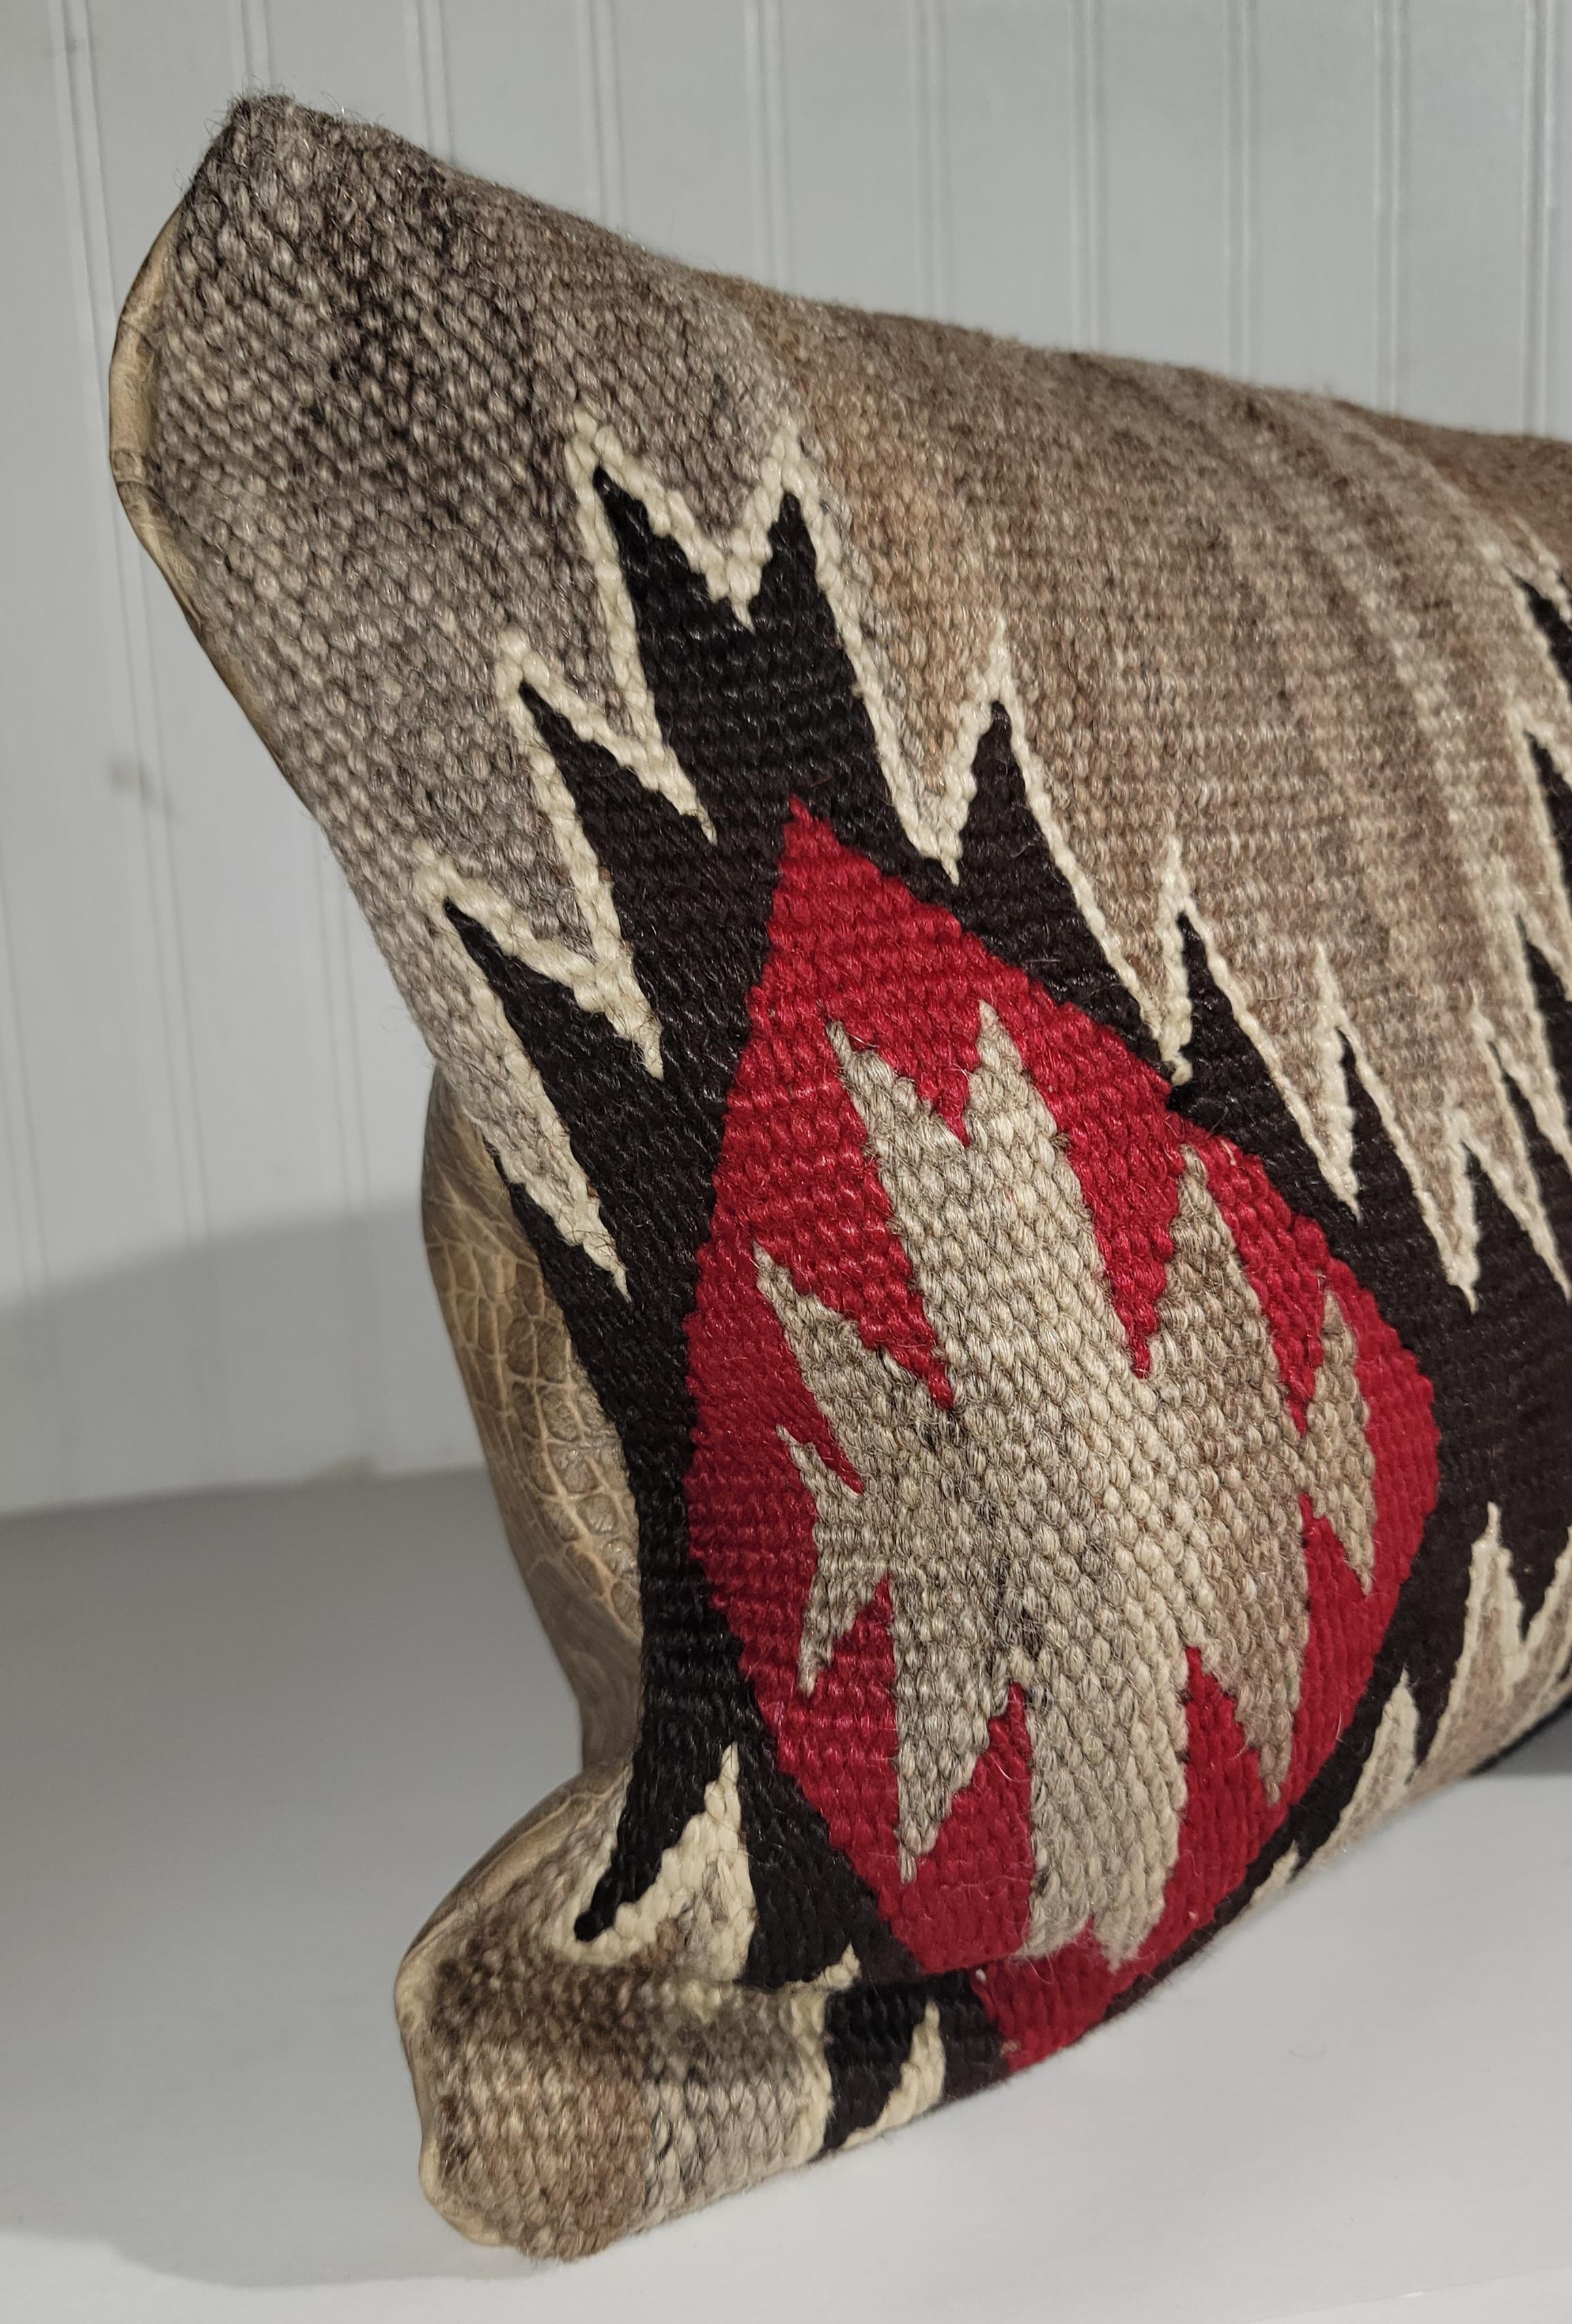 Wool Navajo weaving made into a pillow with crocodile leather backing. the inserts are down and feather filled for comfort and are hypoallergenic. 

The largest pillow measures
27 x 10 
medium - 26 x12 
small - 19.5 x 11